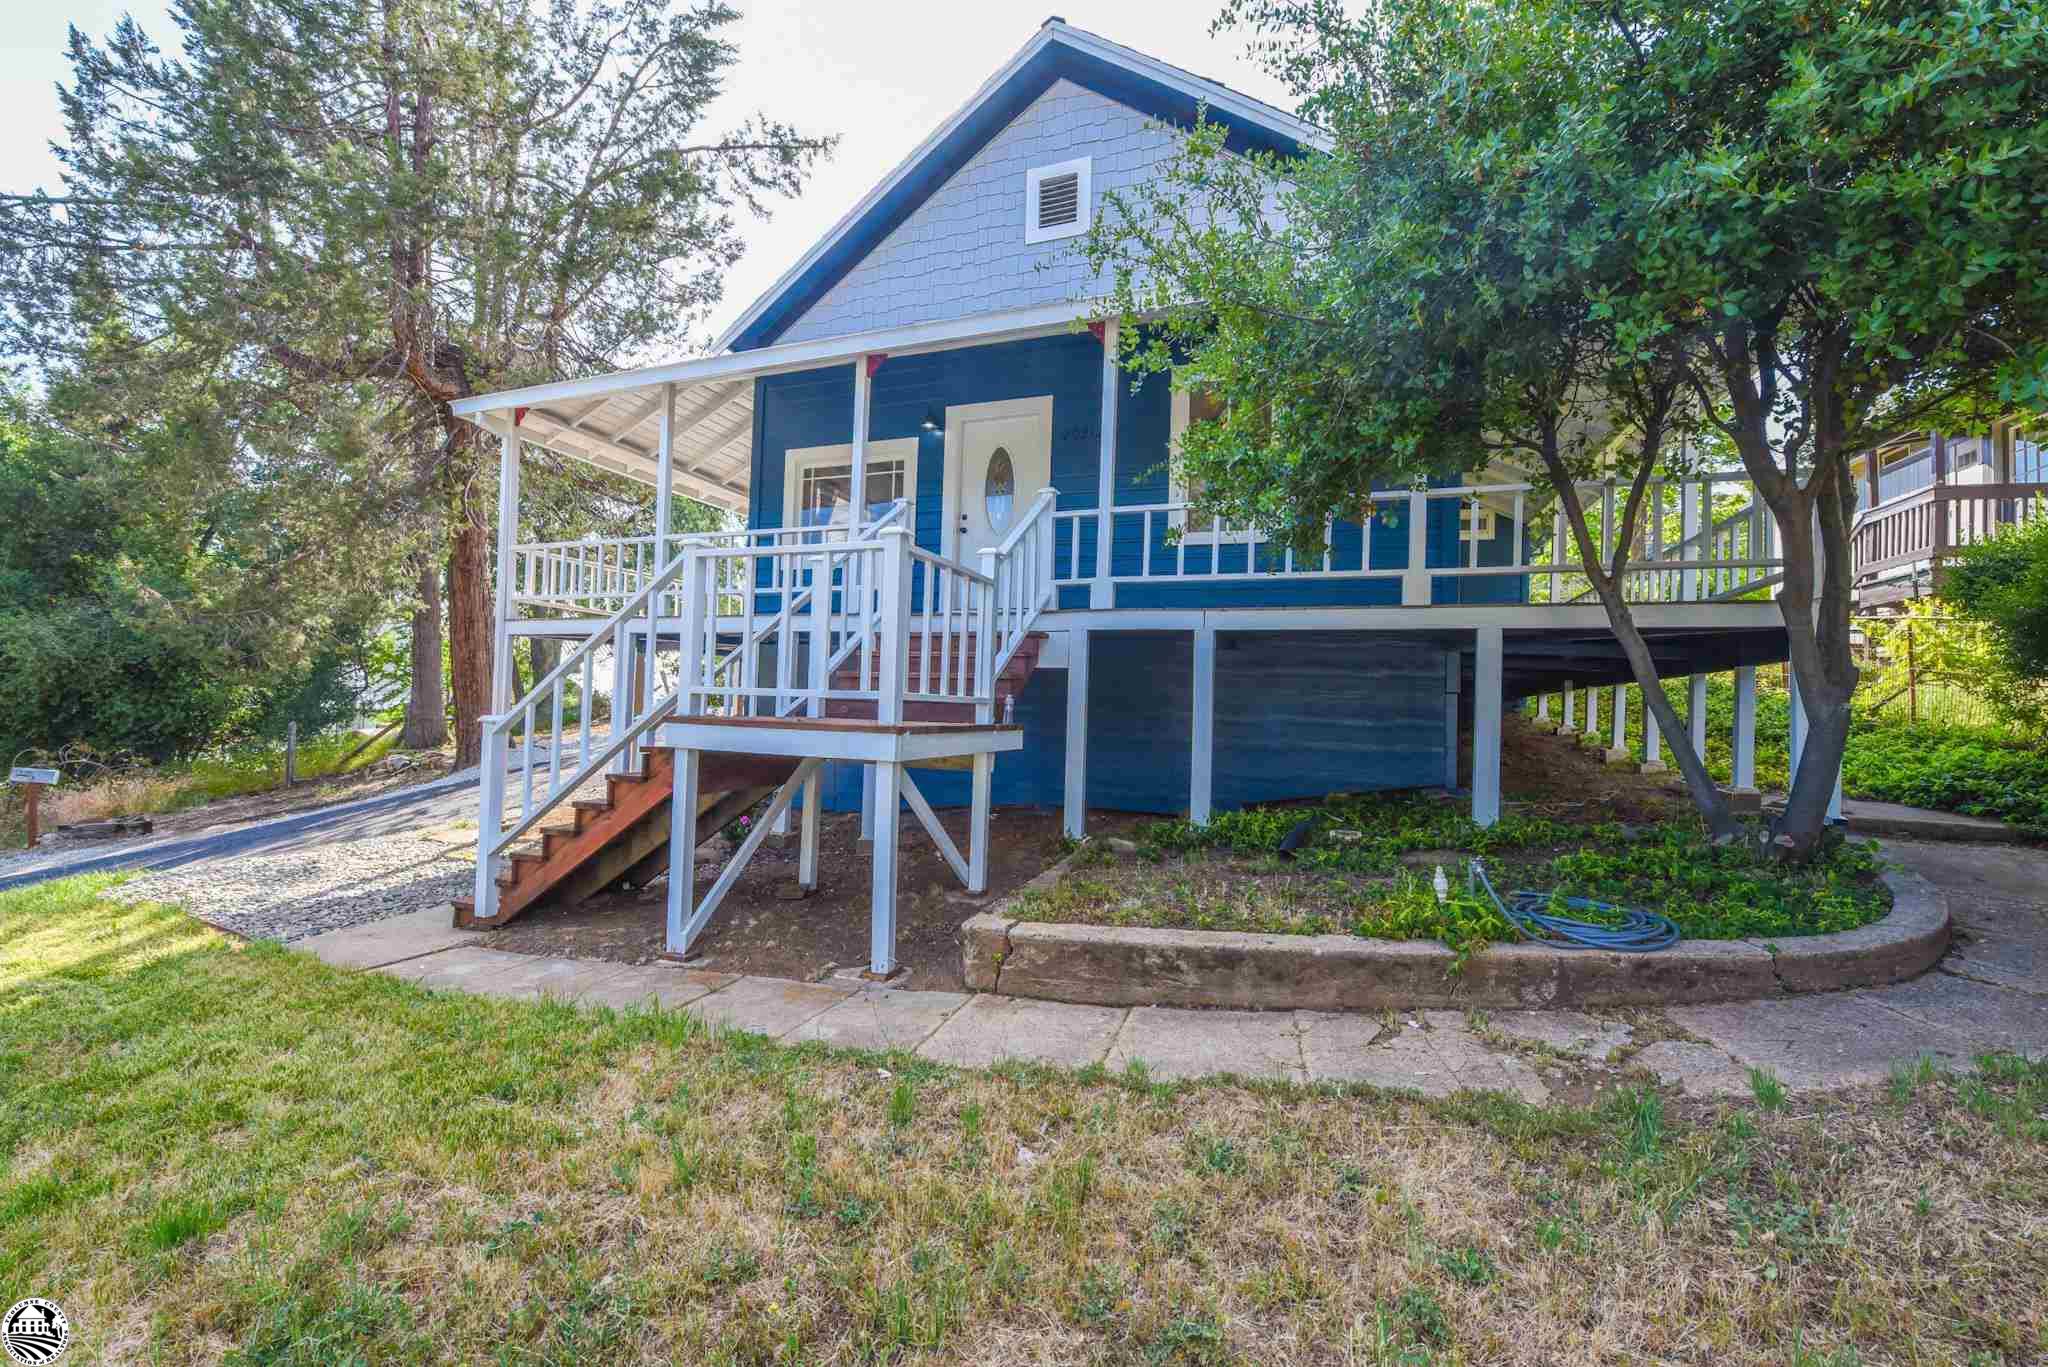 Ranch style 3 bedroom, 2 bath home in Soulsbyville.  Features include newer flooring, granite countertops, stainless appliances, central hvac, and a woodstove.  Main level master suite, bonus room, covered porch, shop, and more.  Just minutes to Twain Harte and Sonora.